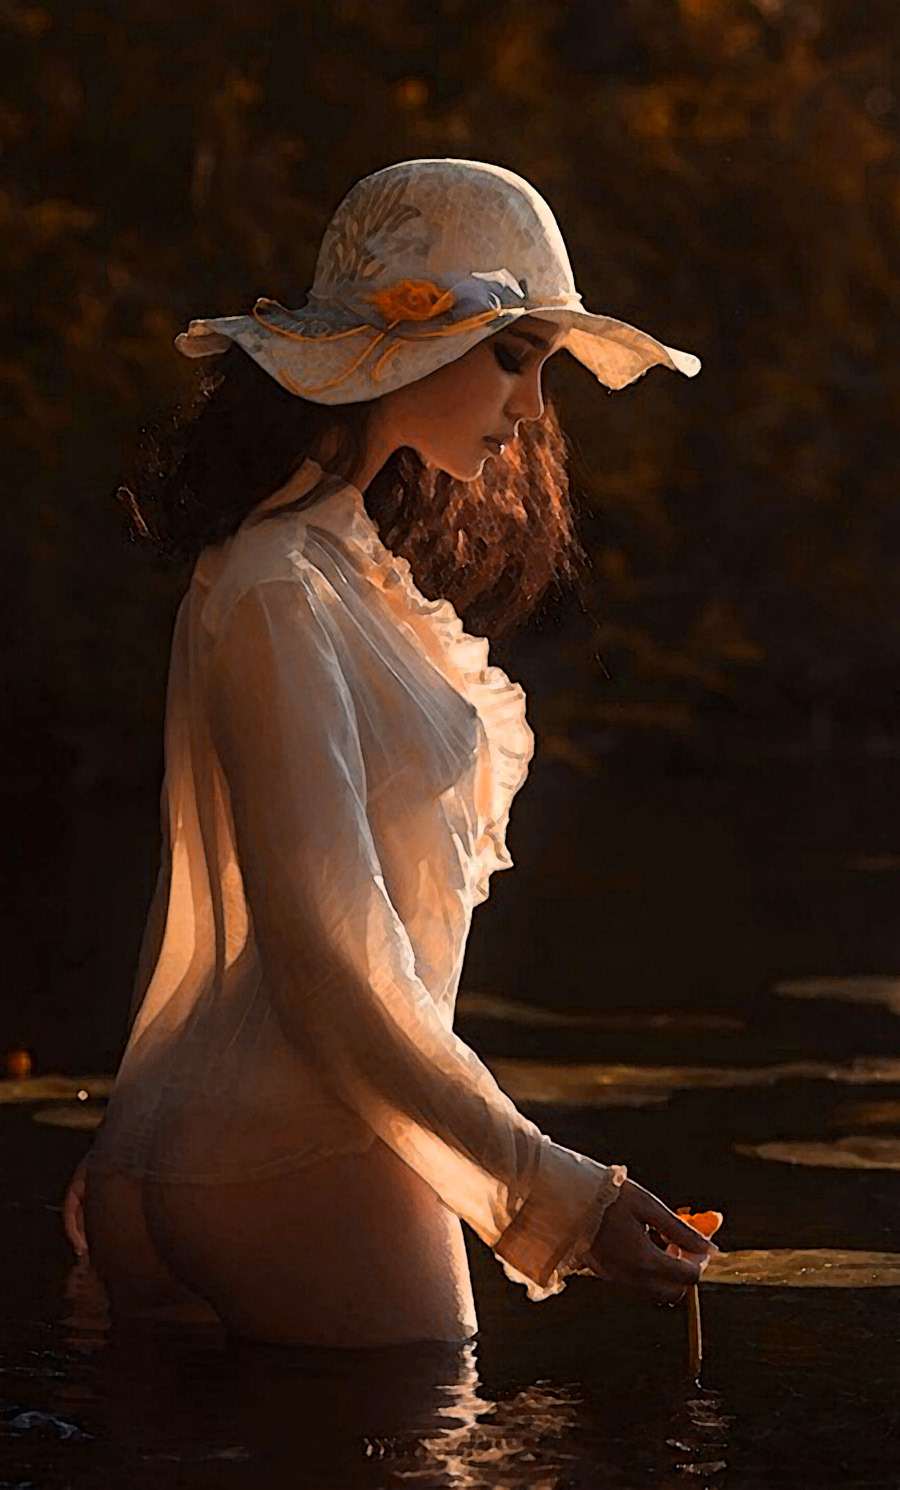 skinny girl eats ass of psycho doctor and painful ass to mouth #wet  #nude  #brunette  #beauty  #standinginwater  #sideview  #sunlit  #sunhat  #sheertop  #pond  #outdoors  #morninglight  #sexy